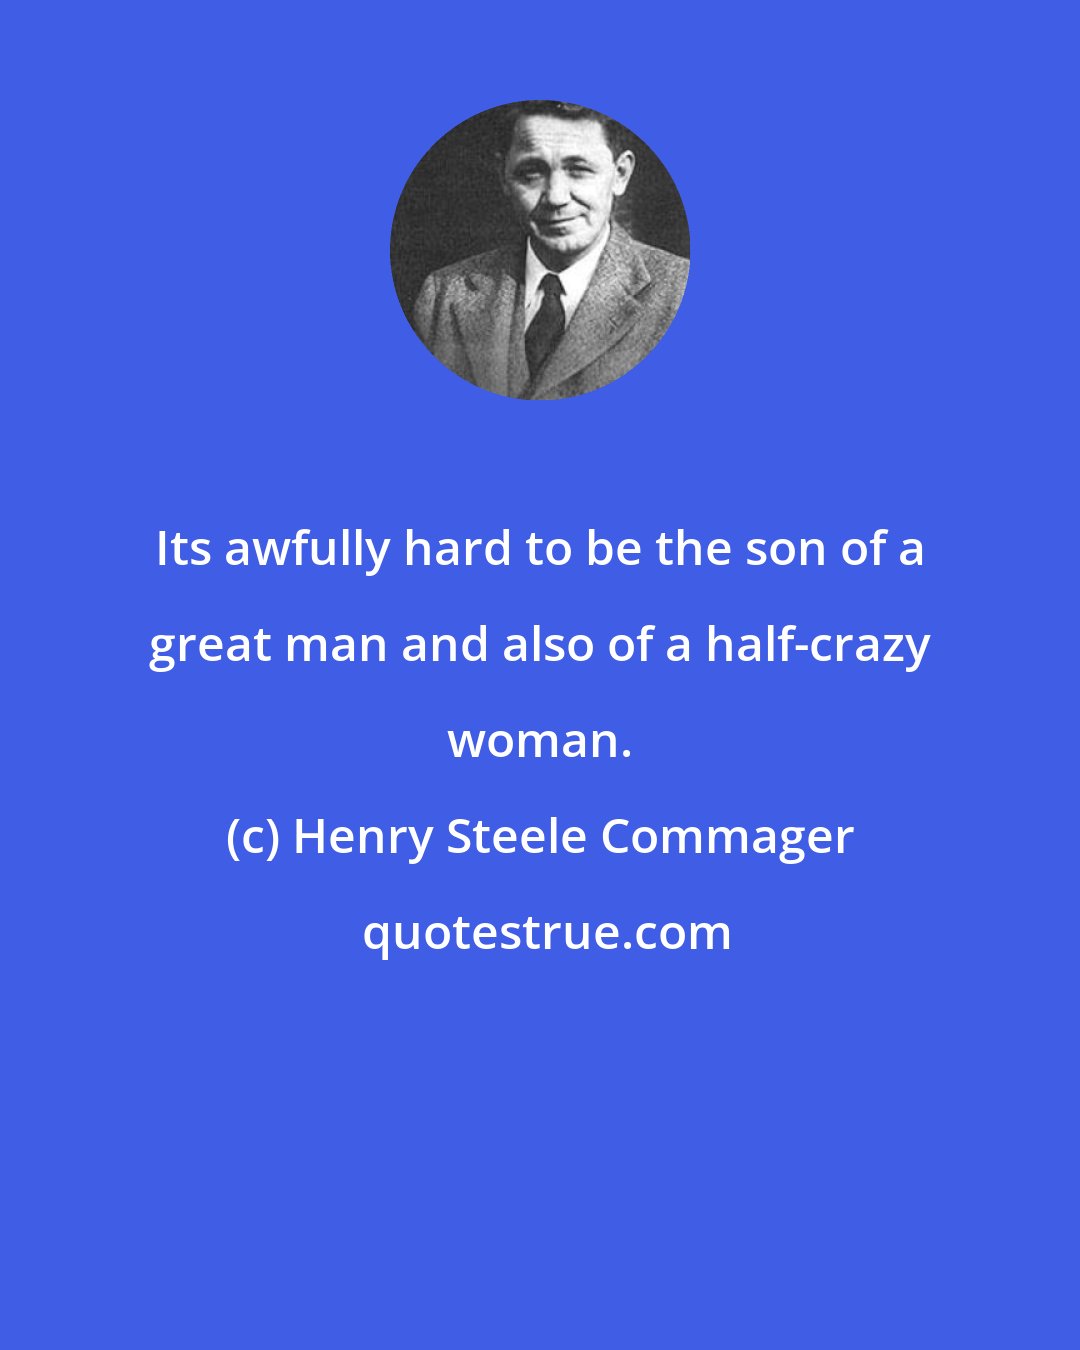 Henry Steele Commager: Its awfully hard to be the son of a great man and also of a half-crazy woman.